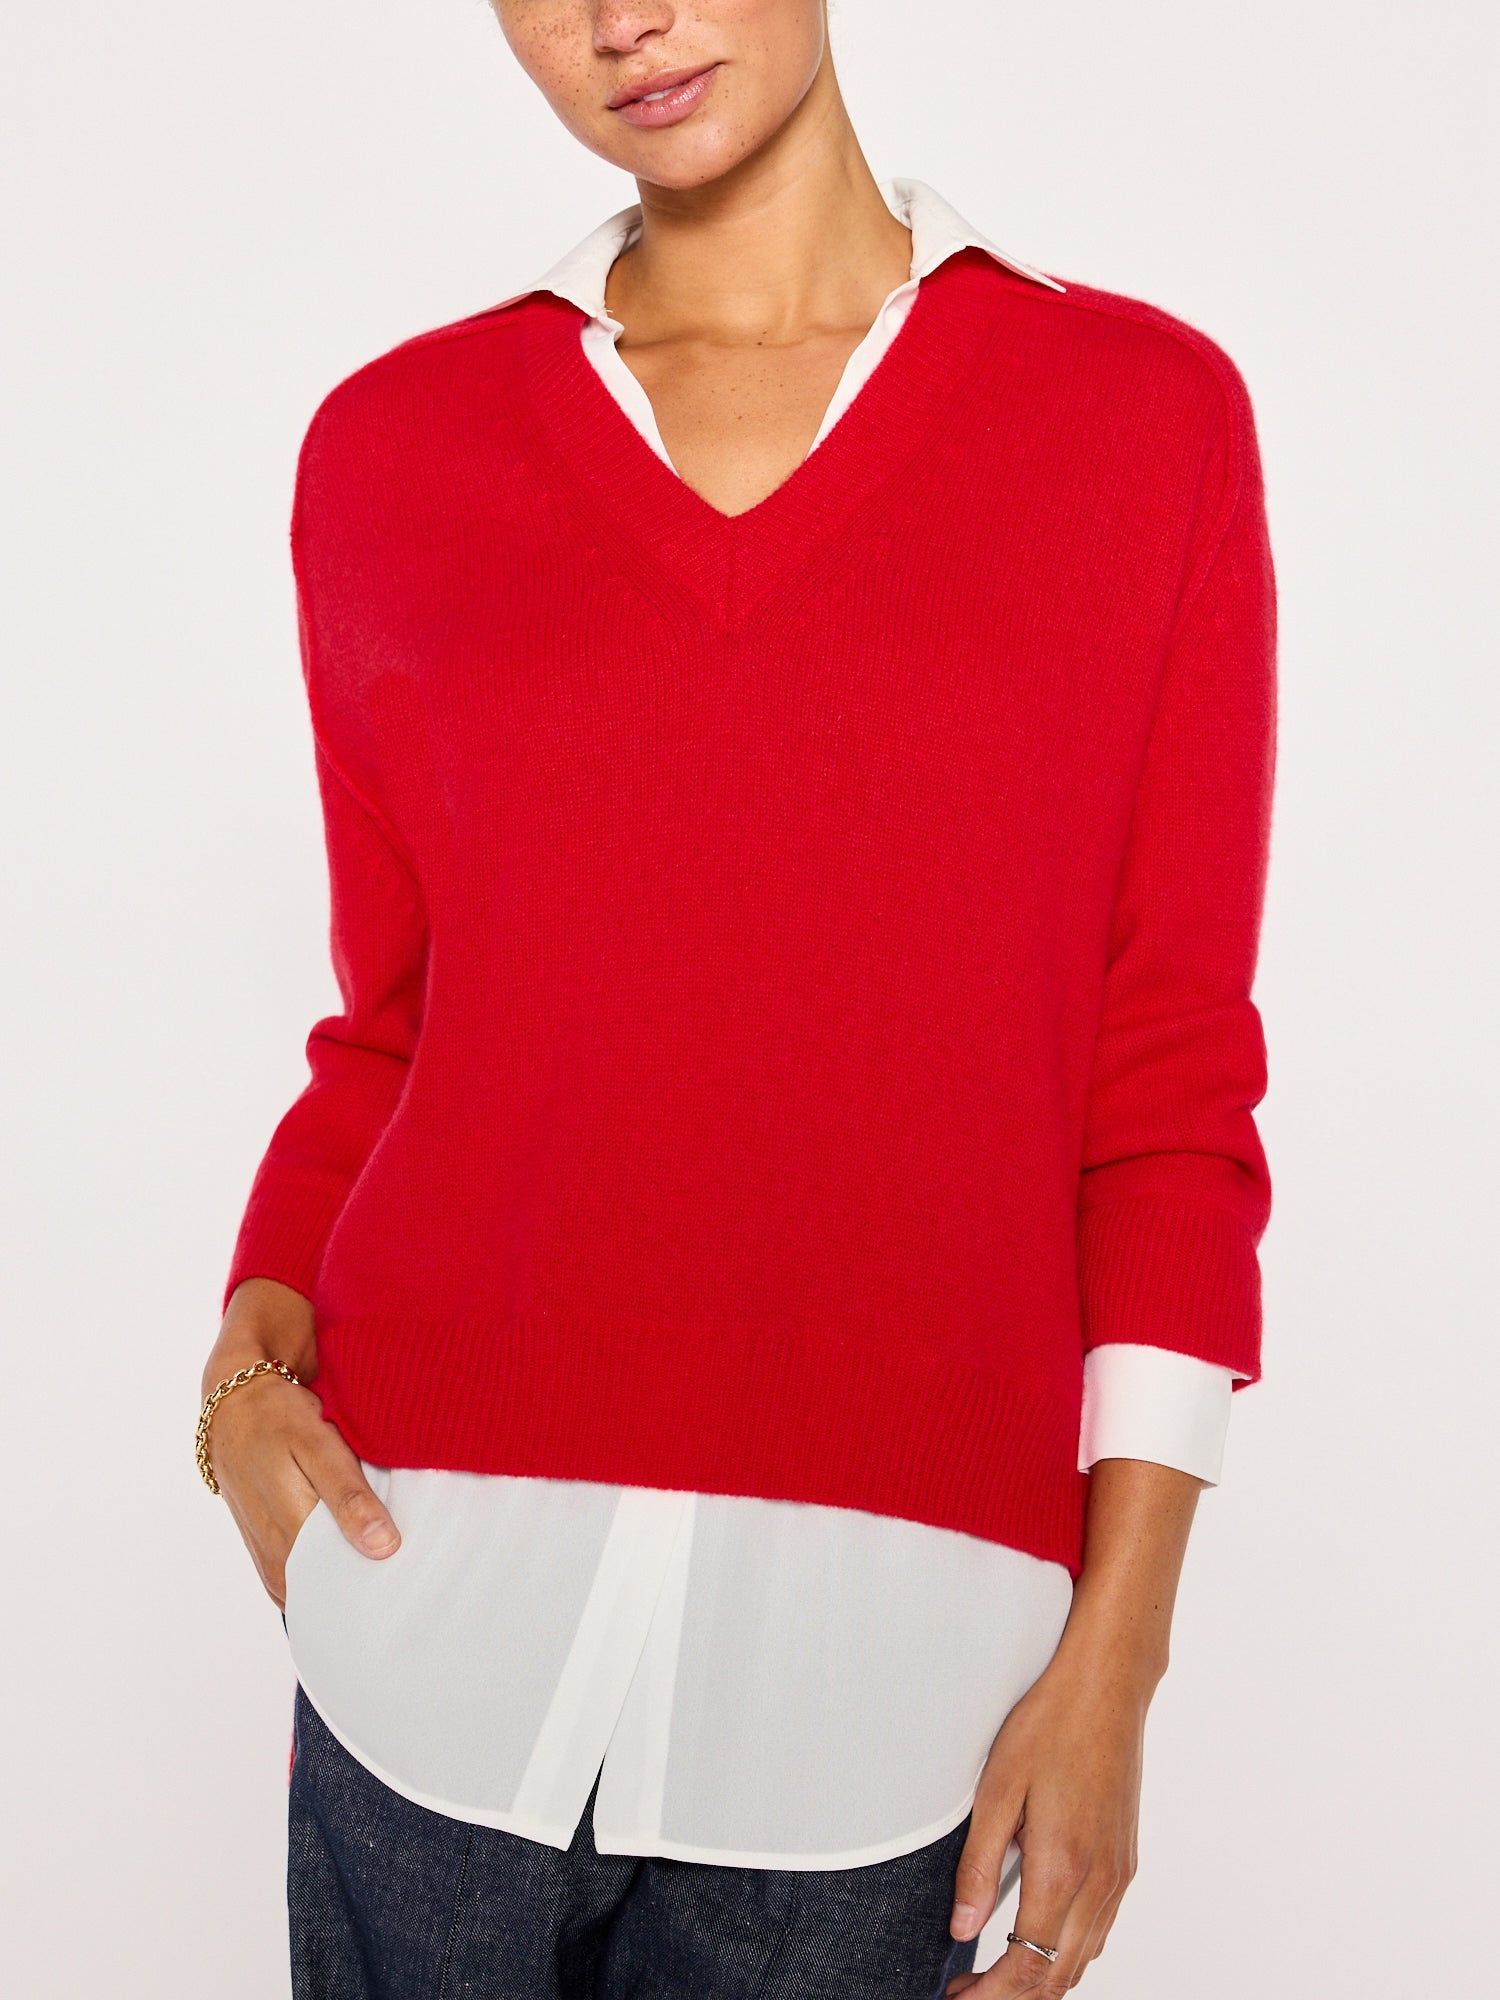 Looker red layered v-neck sweater front view 2